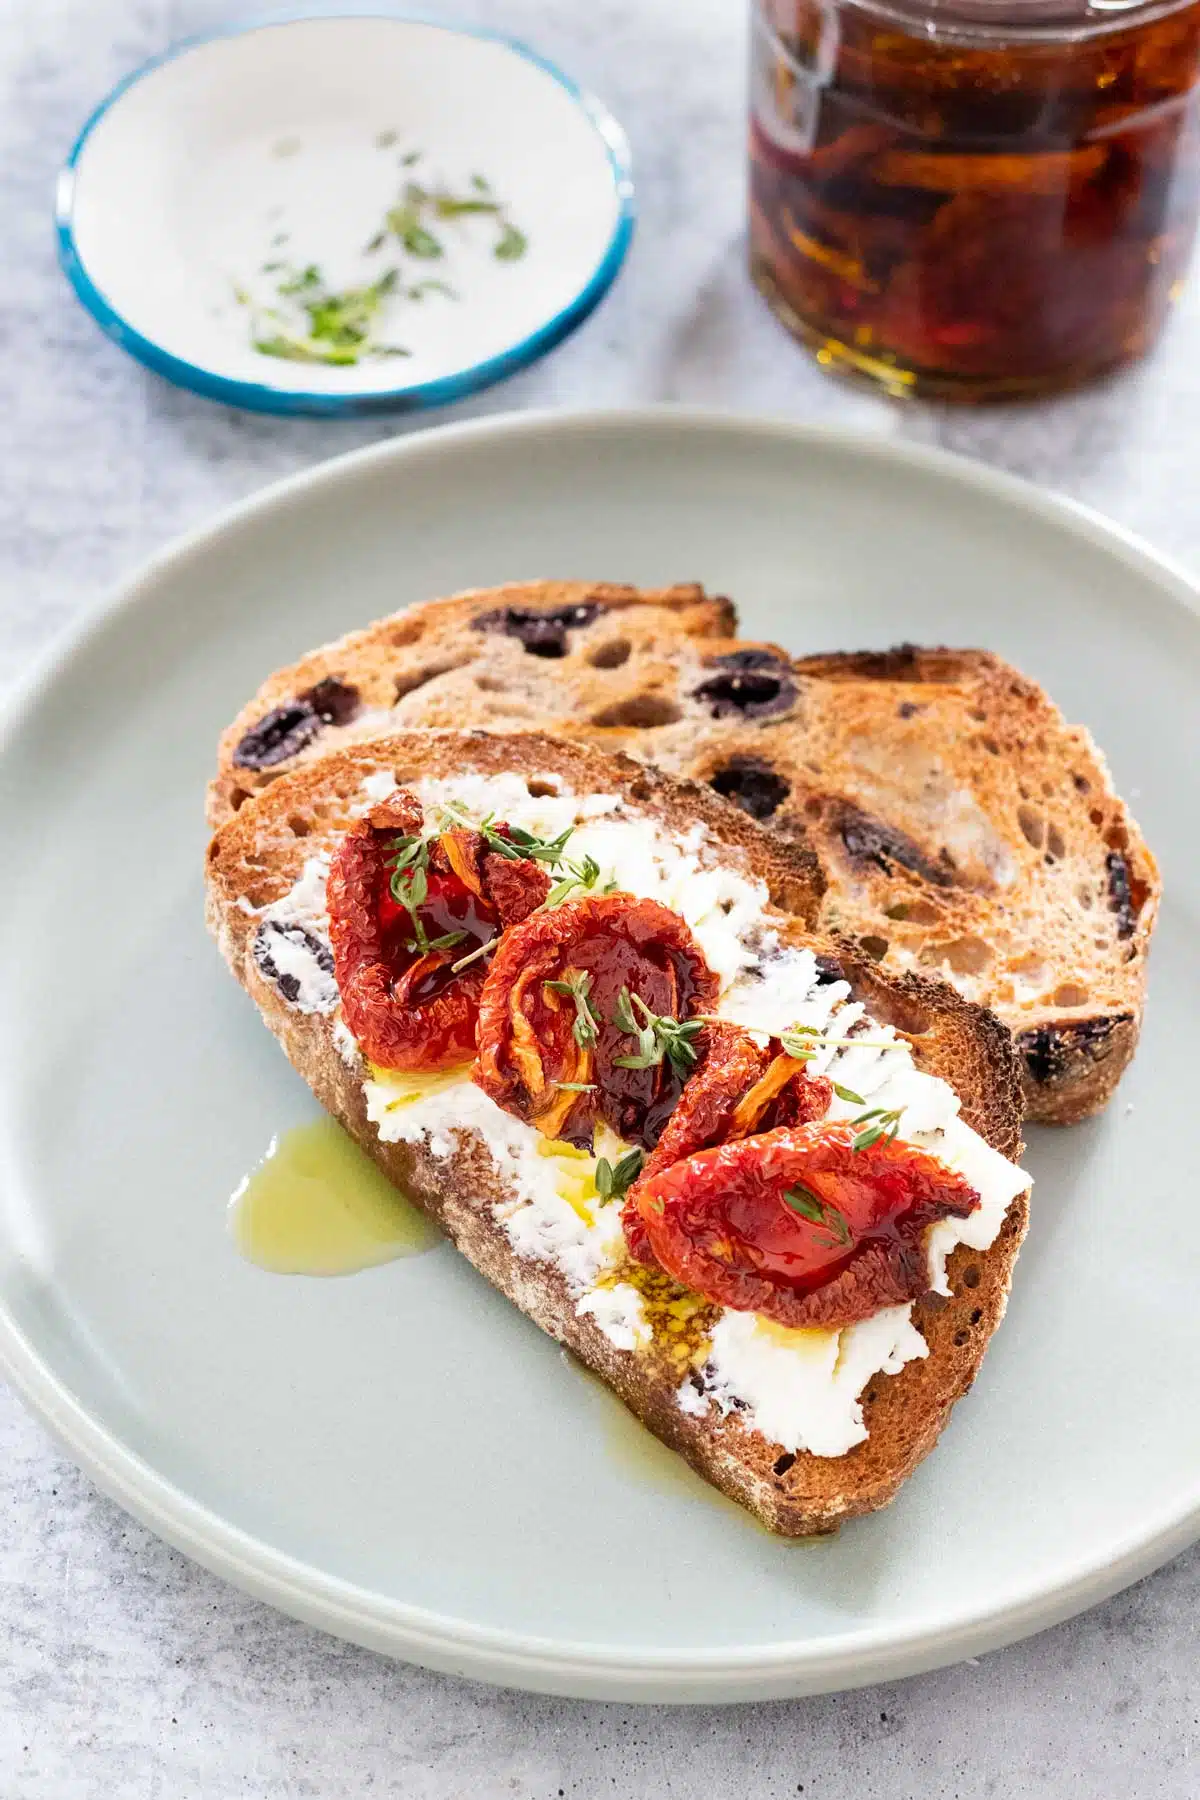 Two pieces of toast are on a duck egg green plate. One piece has been spread with goats cheese and topped with oven dried tomatoes drizzled with olive oil and sprinkled with fresh thyme. A jar of oven dried tomatoes in oil is just above the plate on the table.